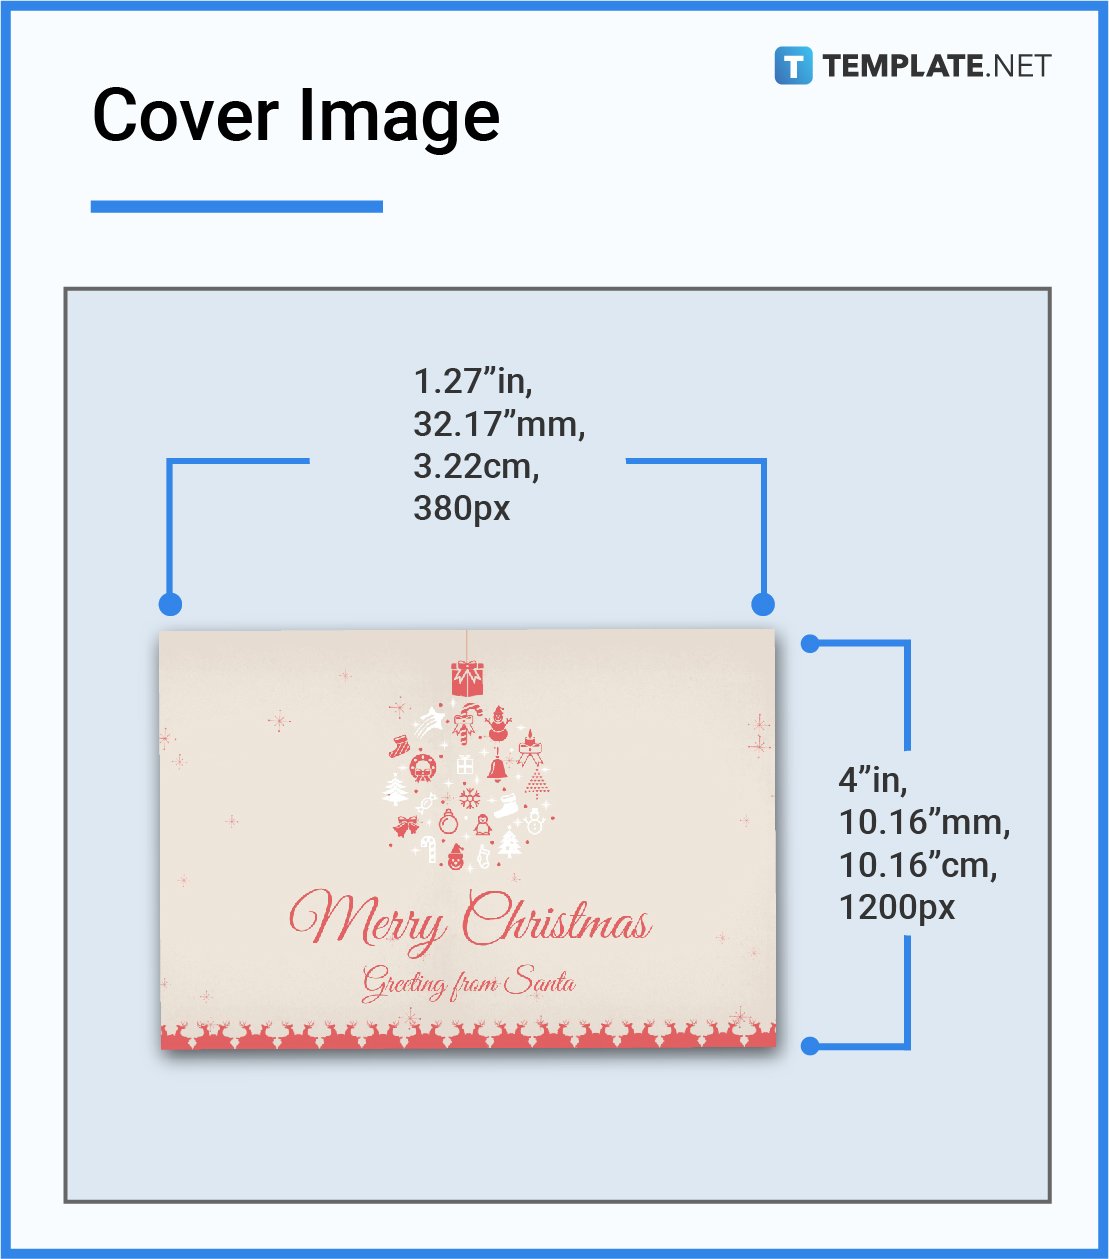 greeting-card-sizes-dimension-inches-mm-cms-pixel